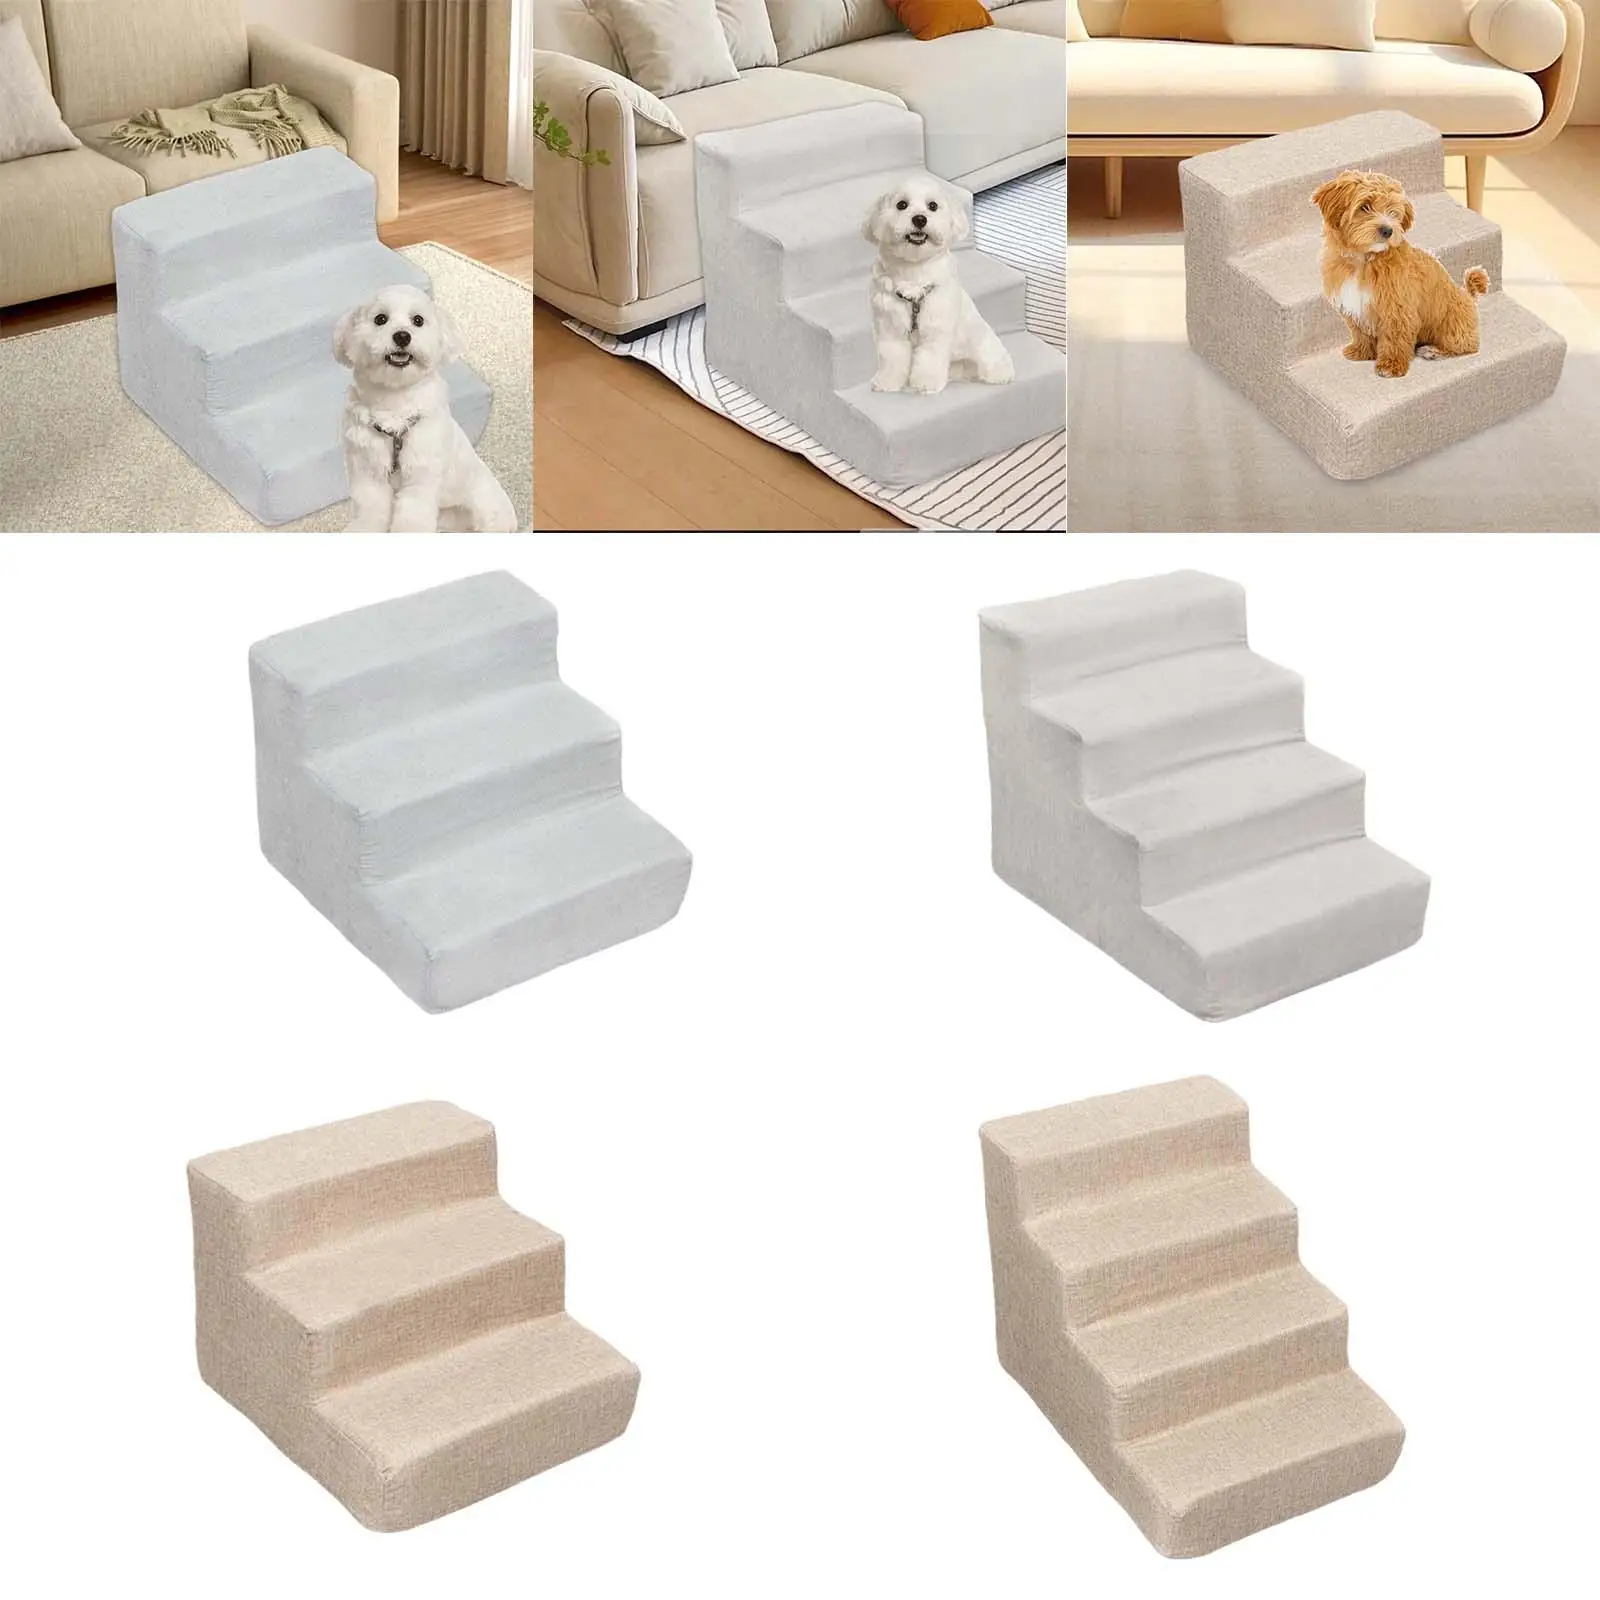 Dog Stairs Portable Gentle Slope Shape Sturdy Stable Convenient for Bed Couch Sofa Chair Removable Cover Versatile Non Slip